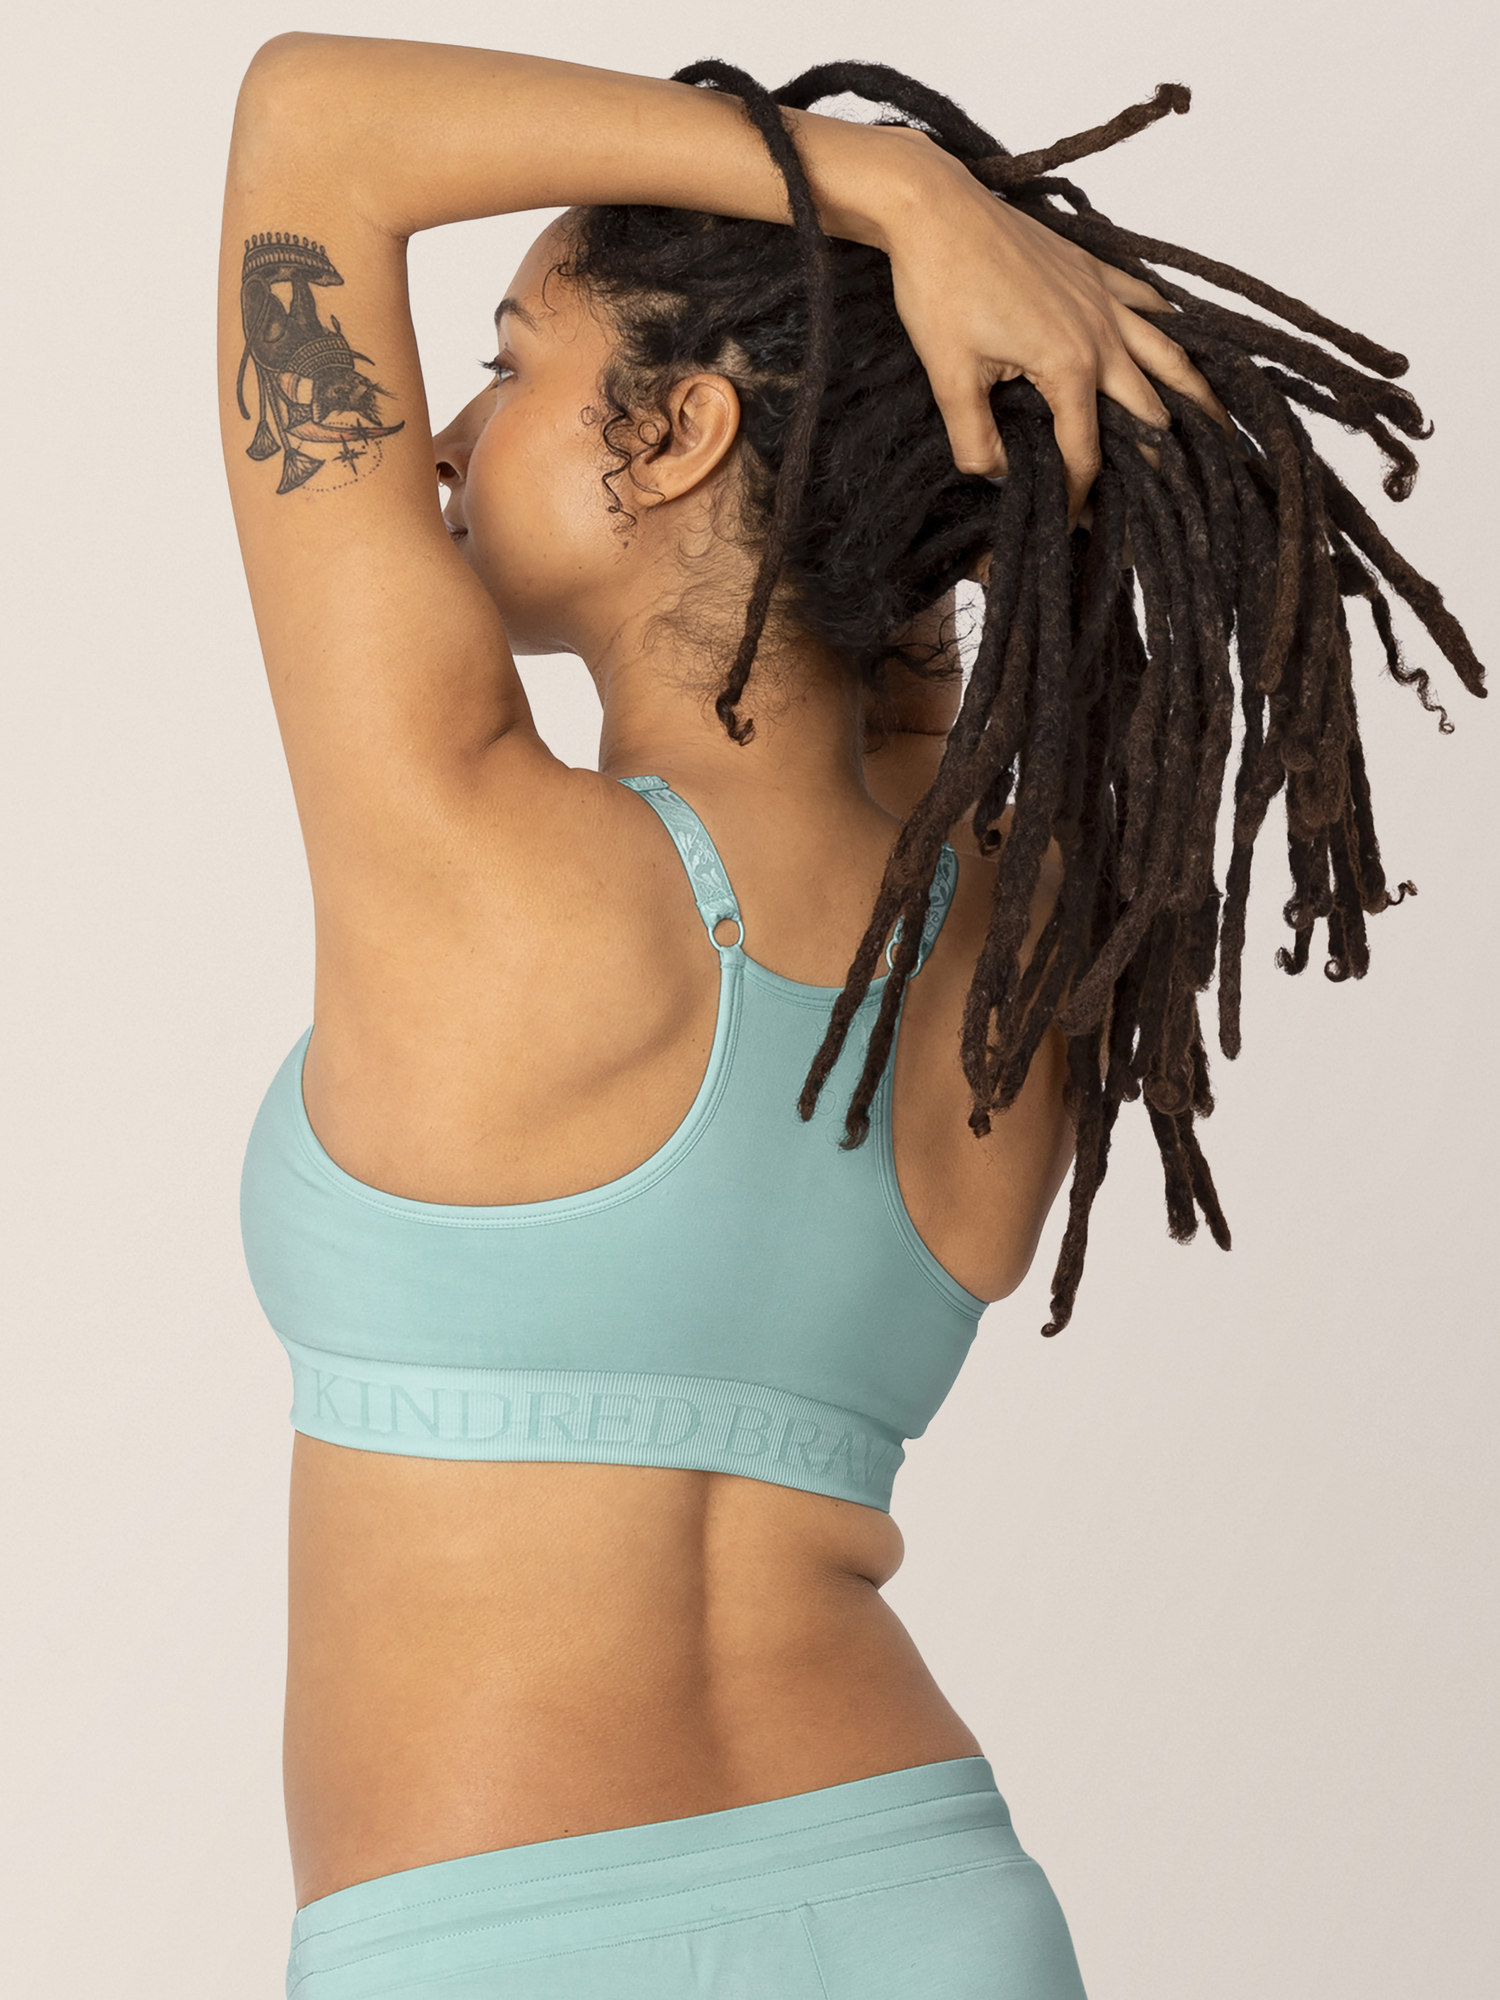 Back view of model wearing the Sublime® Hands-Free Pumping & Nursing Sports Bra in dusty blue green